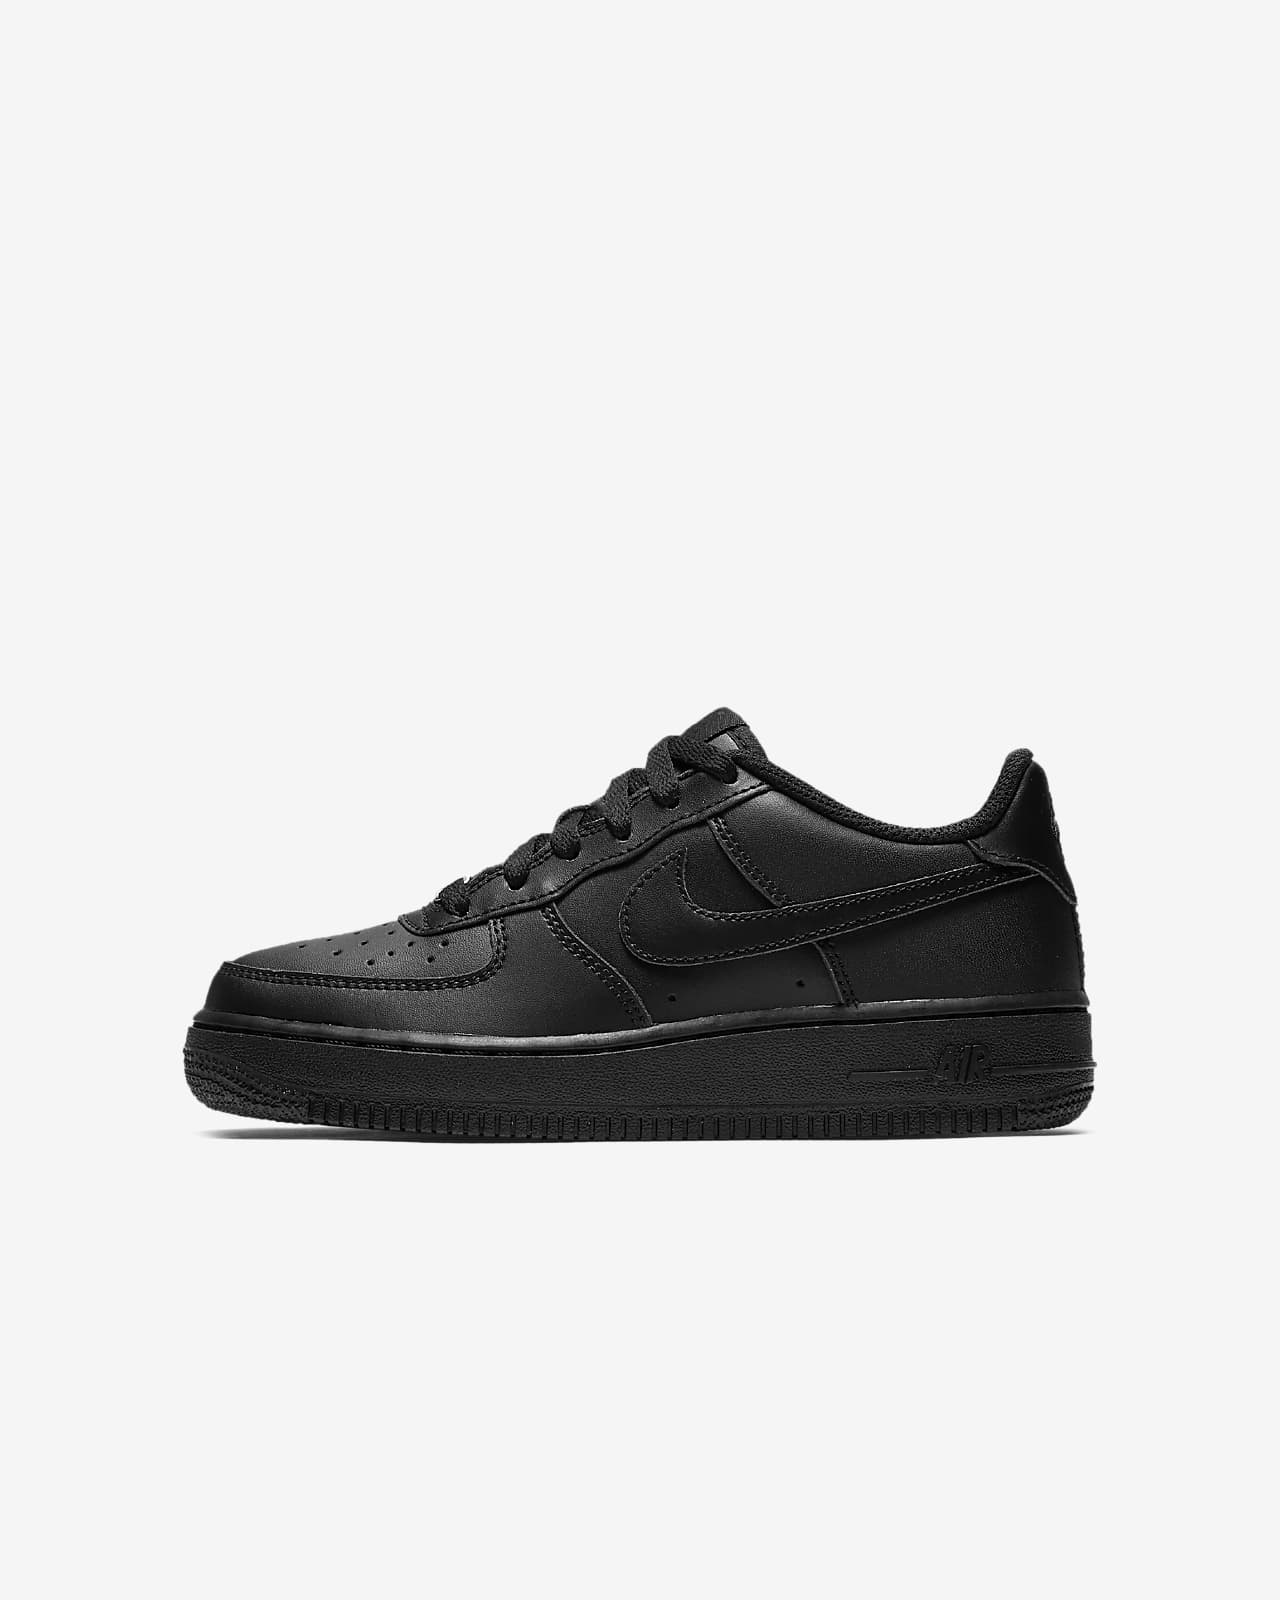 nike air force 1 junior size 5.5